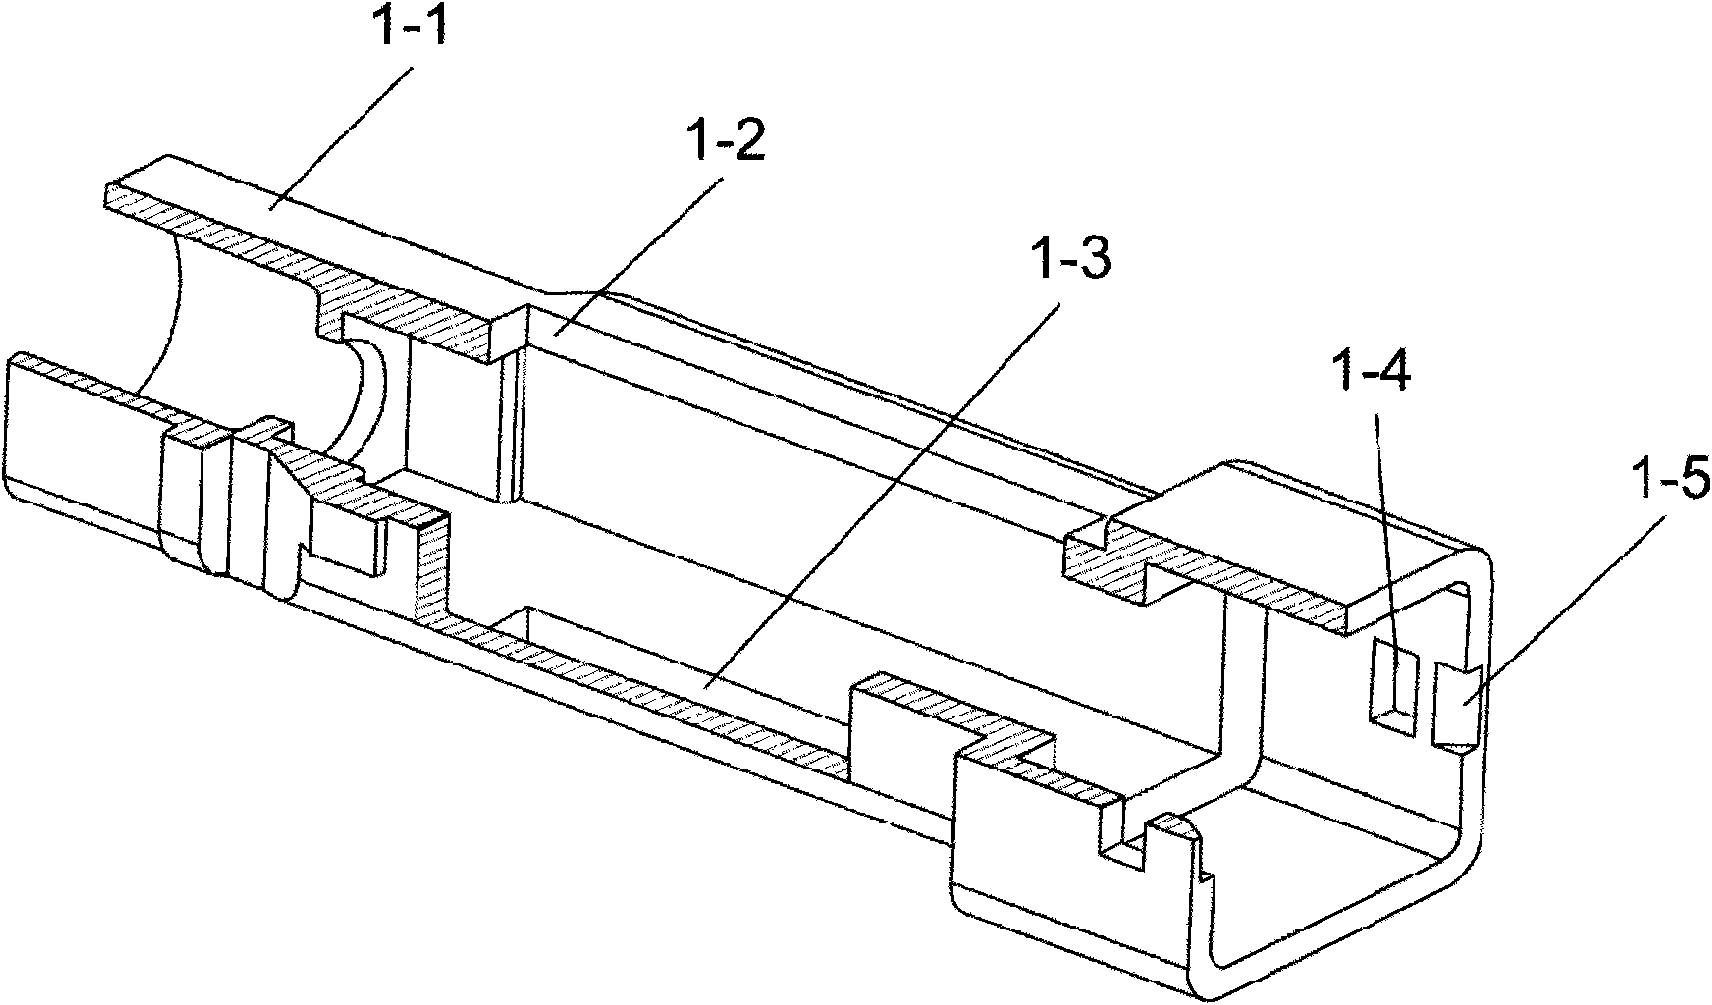 Box-building type optical fiber splicing unit capable of being repeatedly opened and used